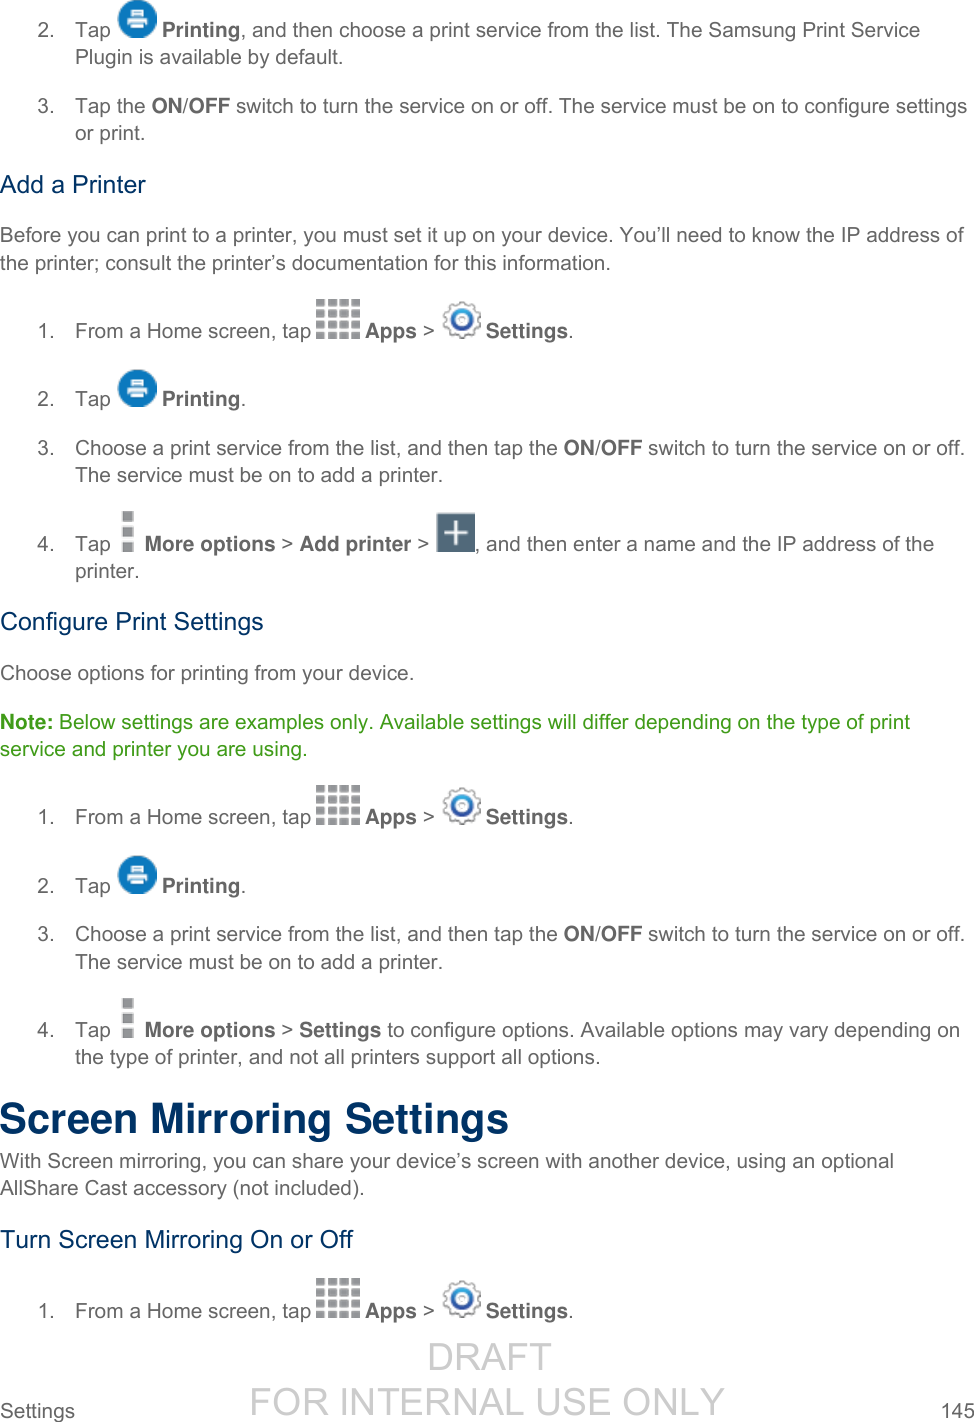                  DRAFT FOR INTERNAL USE ONLY Settings  145   2.  Tap   Printing, and then choose a print service from the list. The Samsung Print Service Plugin is available by default. 3.  Tap the ON/OFF switch to turn the service on or off. The service must be on to configure settings or print. Add a Printer Before you can print to a printer, you must set it up on your device. You’ll need to know the IP address of the printer; consult the printer’s documentation for this information. 1.  From a Home screen, tap   Apps &gt;   Settings.  2.  Tap   Printing. 3.  Choose a print service from the list, and then tap the ON/OFF switch to turn the service on or off. The service must be on to add a printer. 4.  Tap   More options &gt; Add printer &gt; , and then enter a name and the IP address of the printer. Configure Print Settings Choose options for printing from your device.  Note: Below settings are examples only. Available settings will differ depending on the type of print service and printer you are using.  1.  From a Home screen, tap   Apps &gt;   Settings.  2.  Tap   Printing. 3.  Choose a print service from the list, and then tap the ON/OFF switch to turn the service on or off. The service must be on to add a printer. 4.  Tap   More options &gt; Settings to configure options. Available options may vary depending on the type of printer, and not all printers support all options. Screen Mirroring Settings With Screen mirroring, you can share your device’s screen with another device, using an optional AllShare Cast accessory (not included). Turn Screen Mirroring On or Off 1.  From a Home screen, tap   Apps &gt;   Settings.  